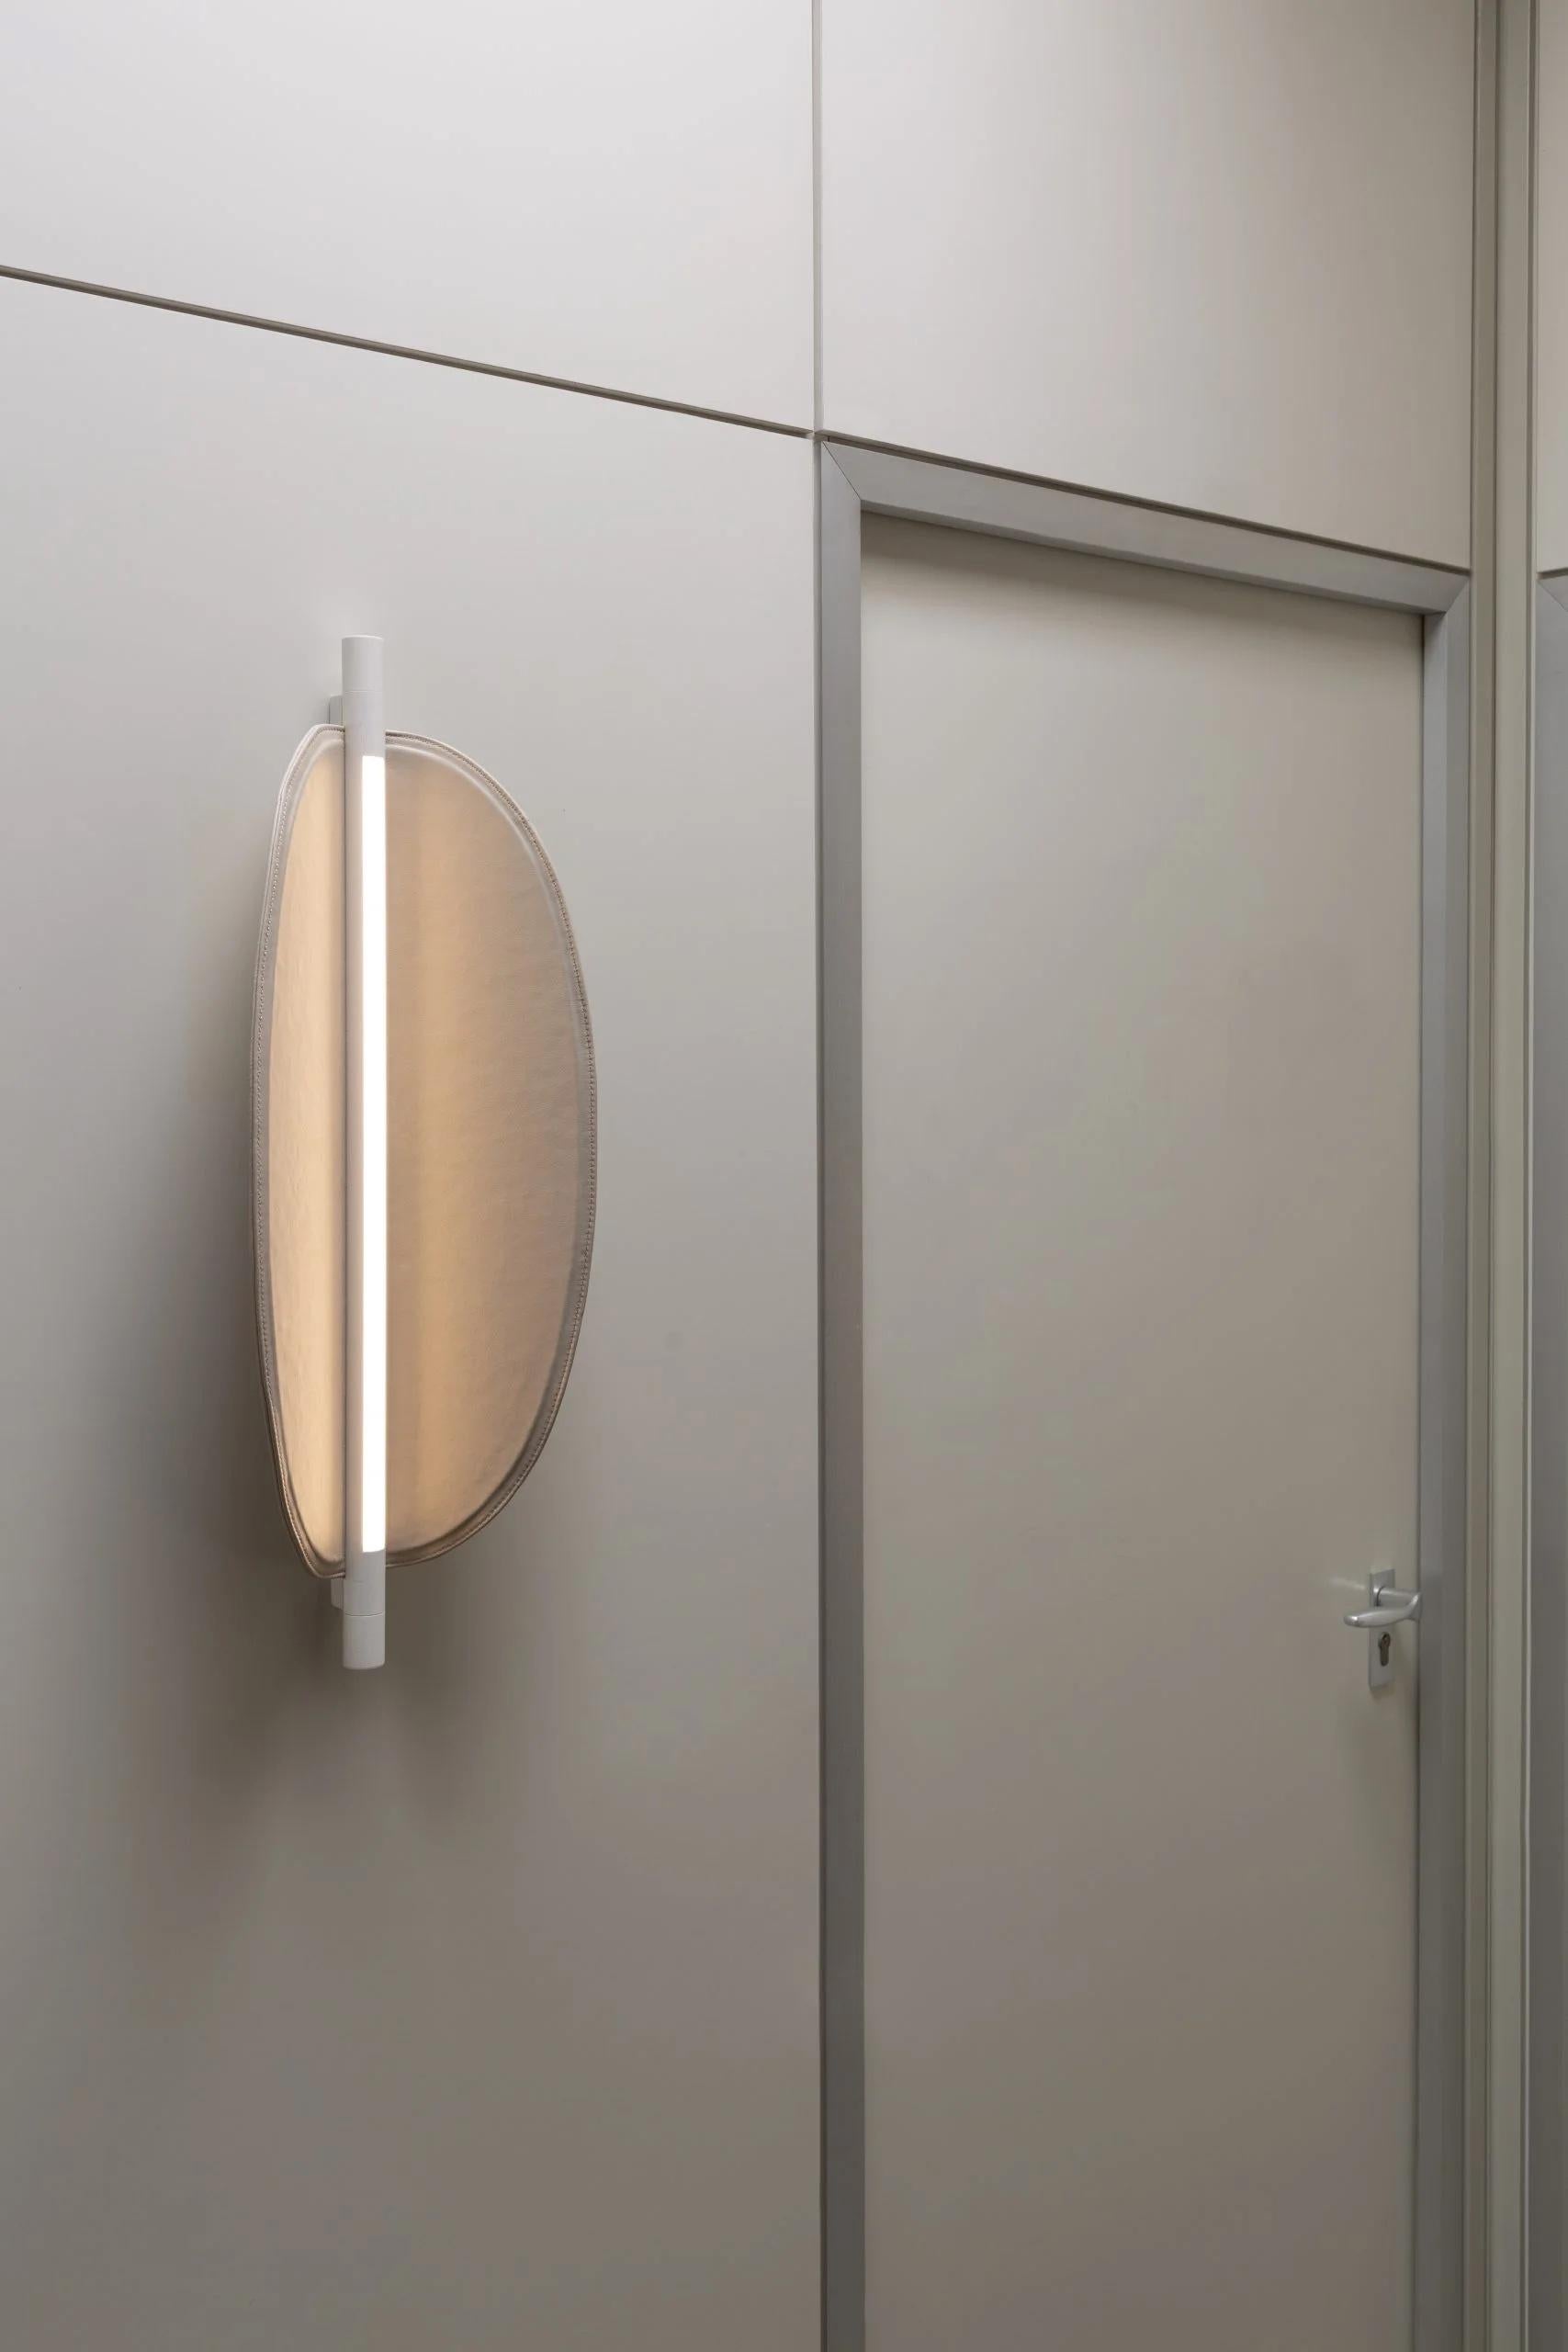 Thula 562.41 by Frederica Biasi x Tooy
Wall lamp
Compliant with USA electric system

Model shown: 
- hardware Beige 
- details Beige
- shade Leather beige

Materials: aluminum, metal, leather, wood

The Thula wall lamps are based on a simple and